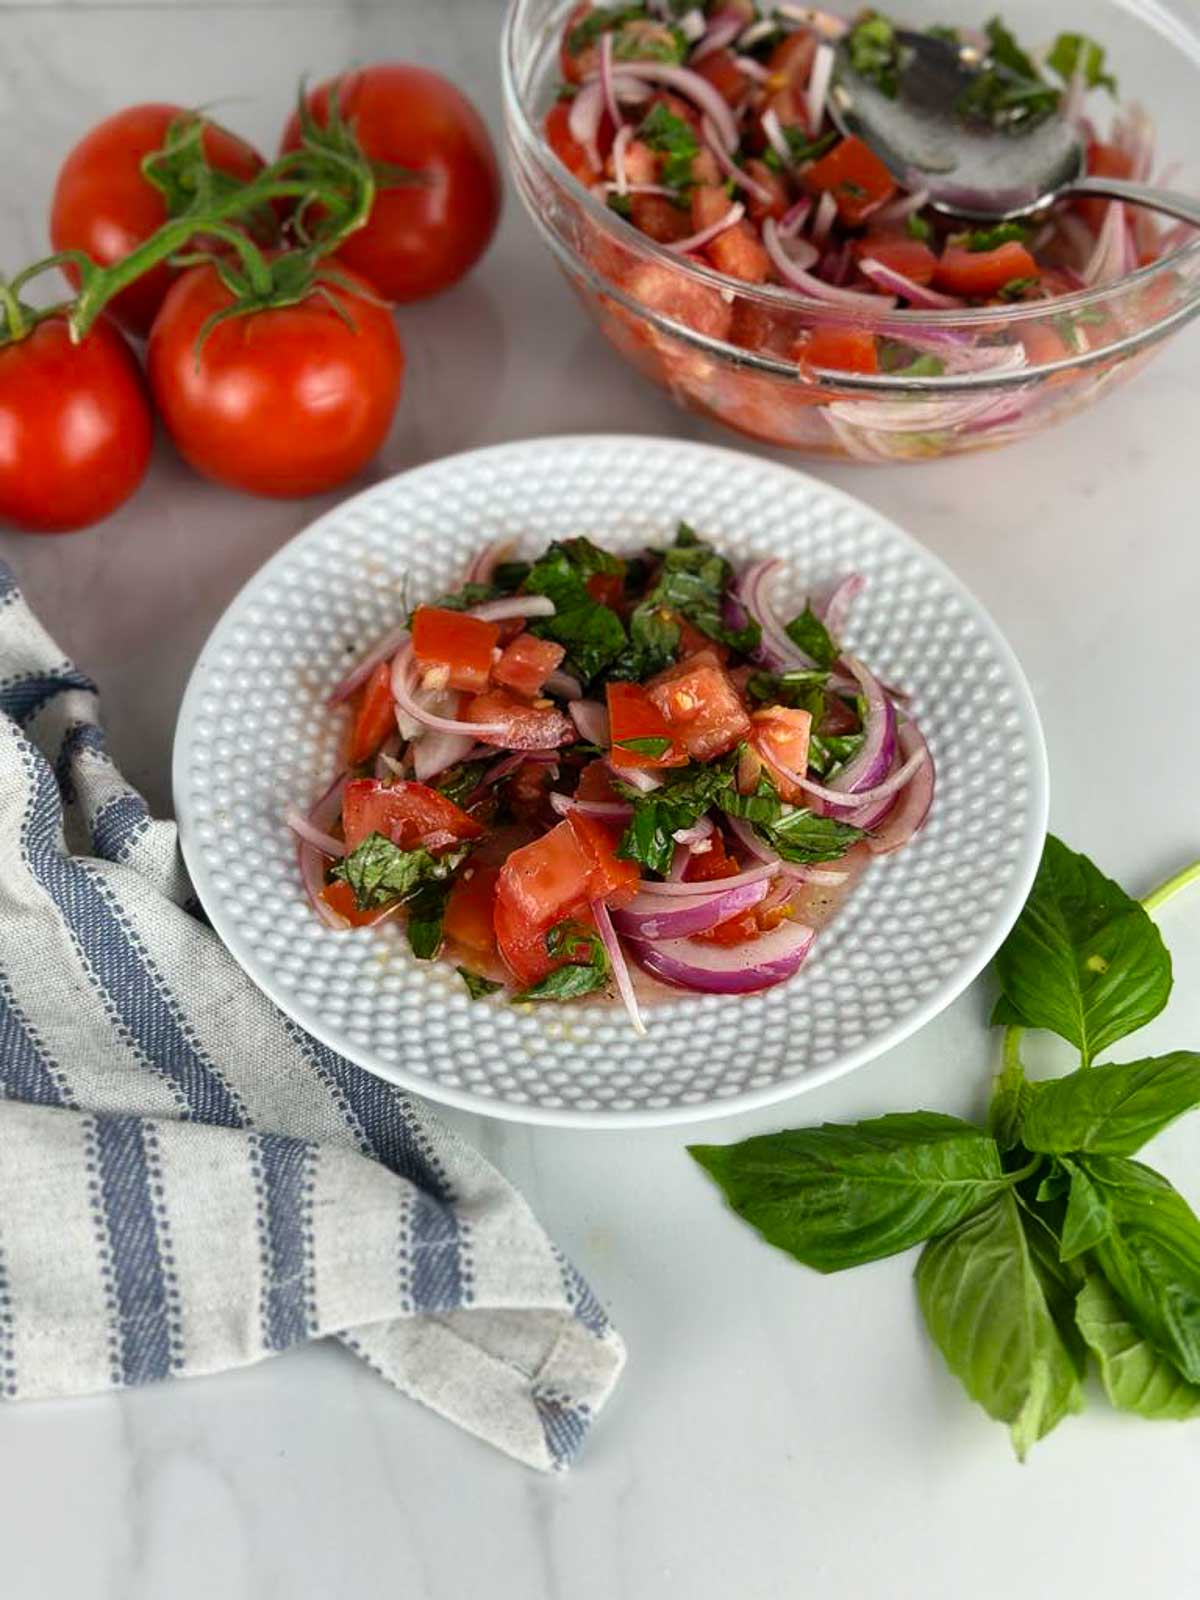 Tomato and onion salad with vinegar is a refreshing light lunch or delicious side dish or starter for any meal.